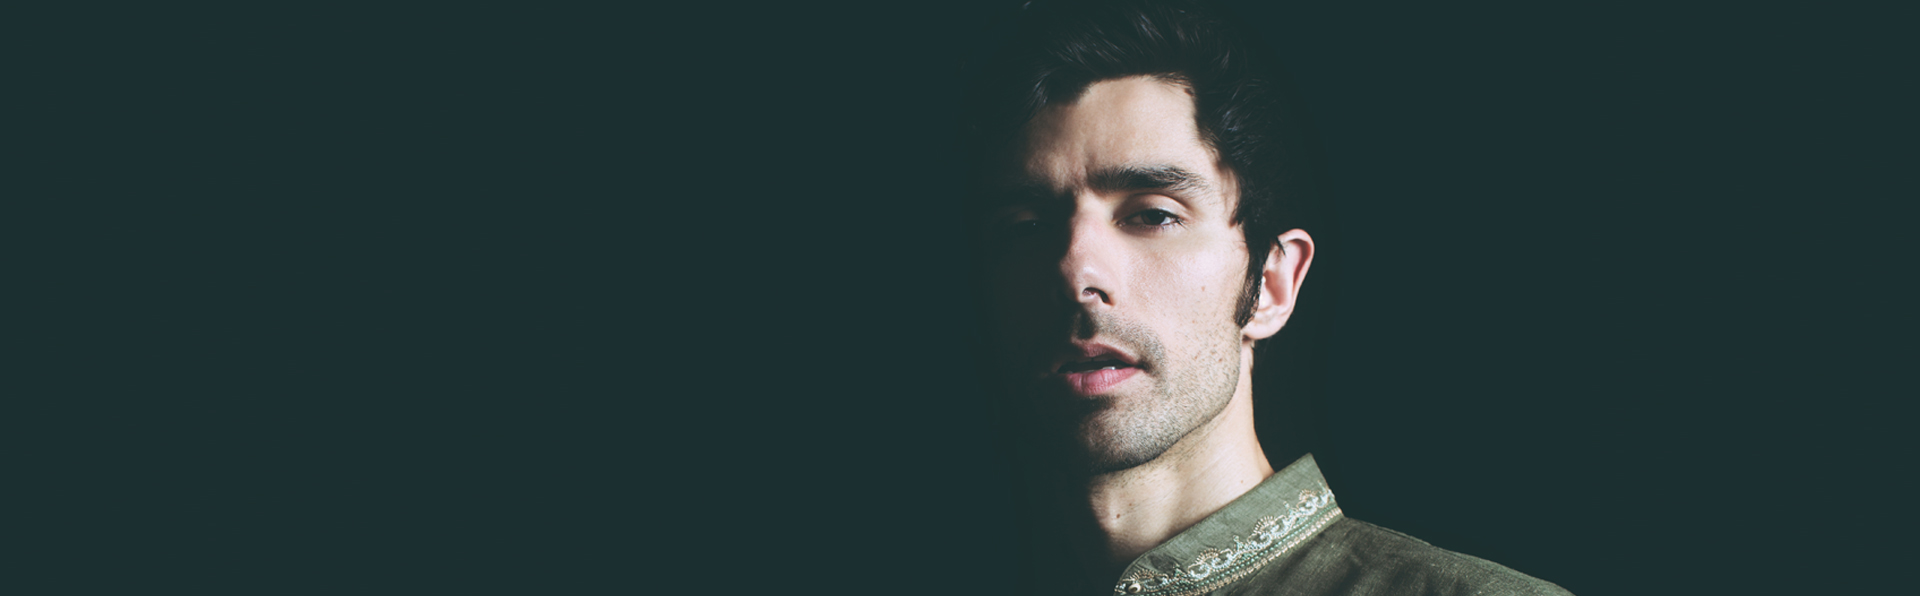 KSHMR launches his own Dharma label